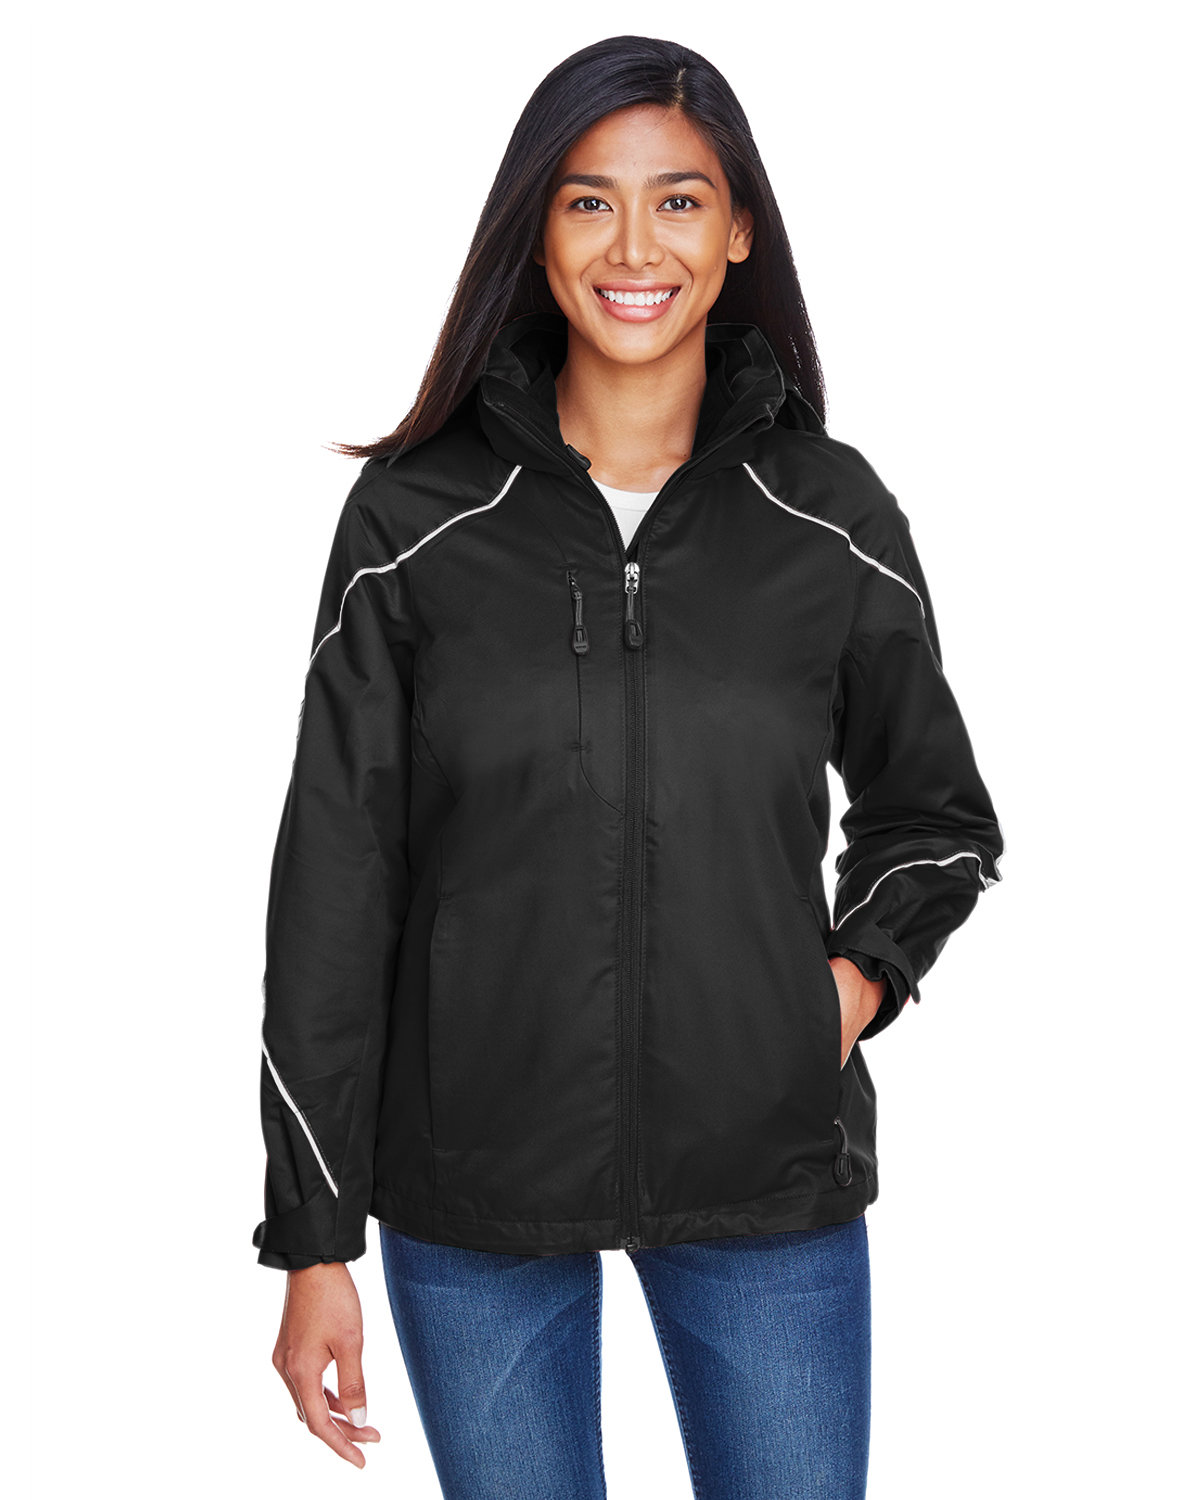 Ladies Angle 3-In-1 Jacket With Bonded Fleece Liner-